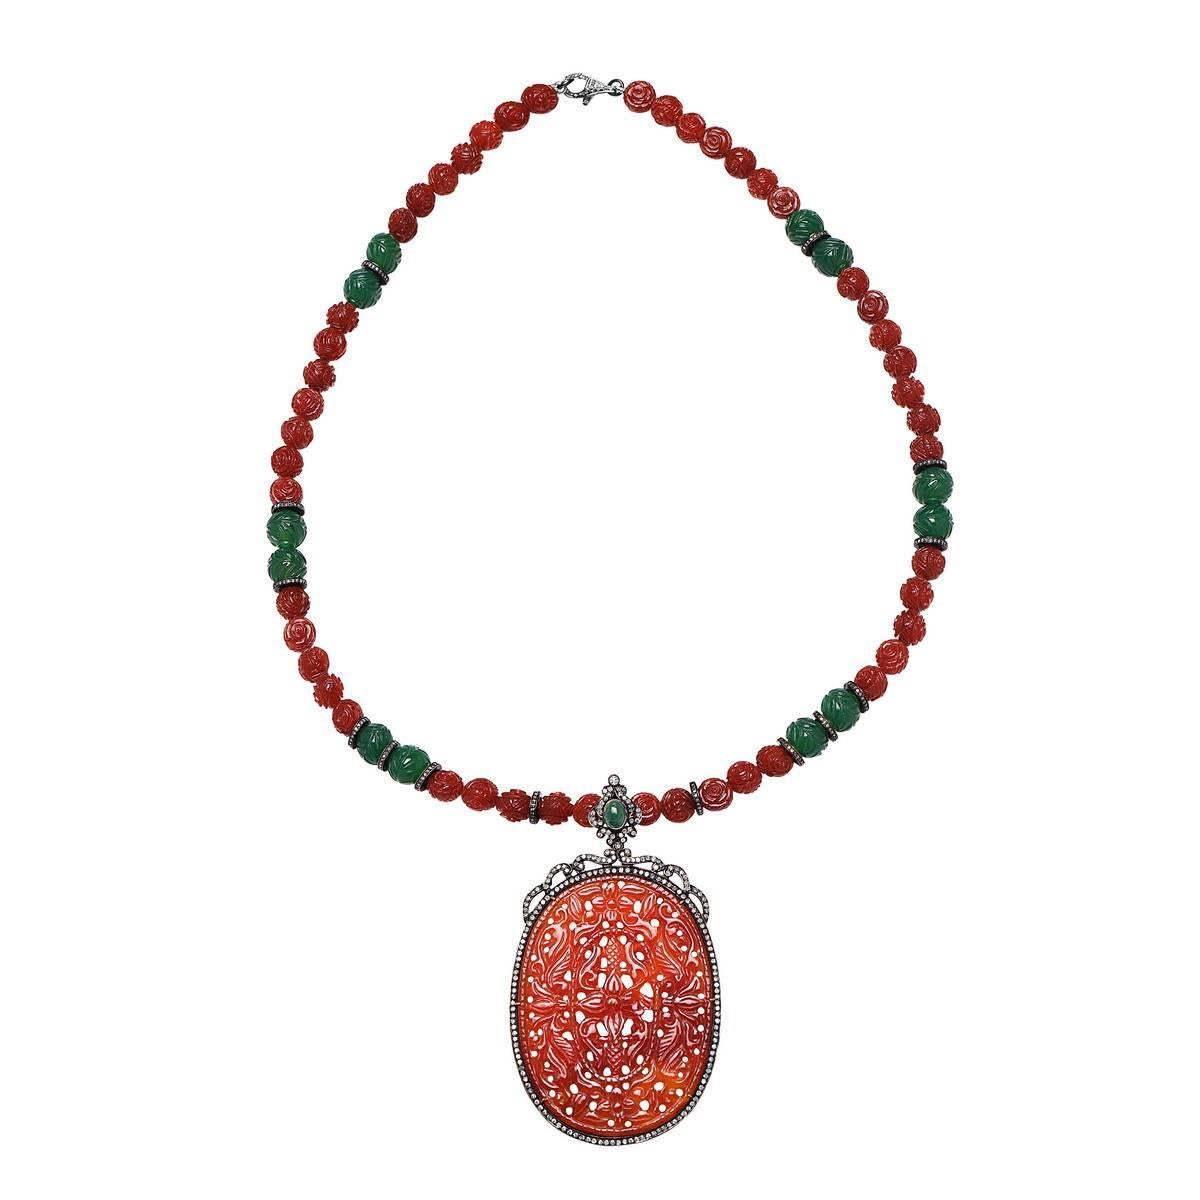 Bold and Beautiful Carved Agate Pendant with pave diamonds around and beautiful motif.. with carved onyx beaded necklace.

D:5.32ct
Slv:27.56gm
Onyx-132.00cts
Agate-388.95cts
Emerald:1.20ct

